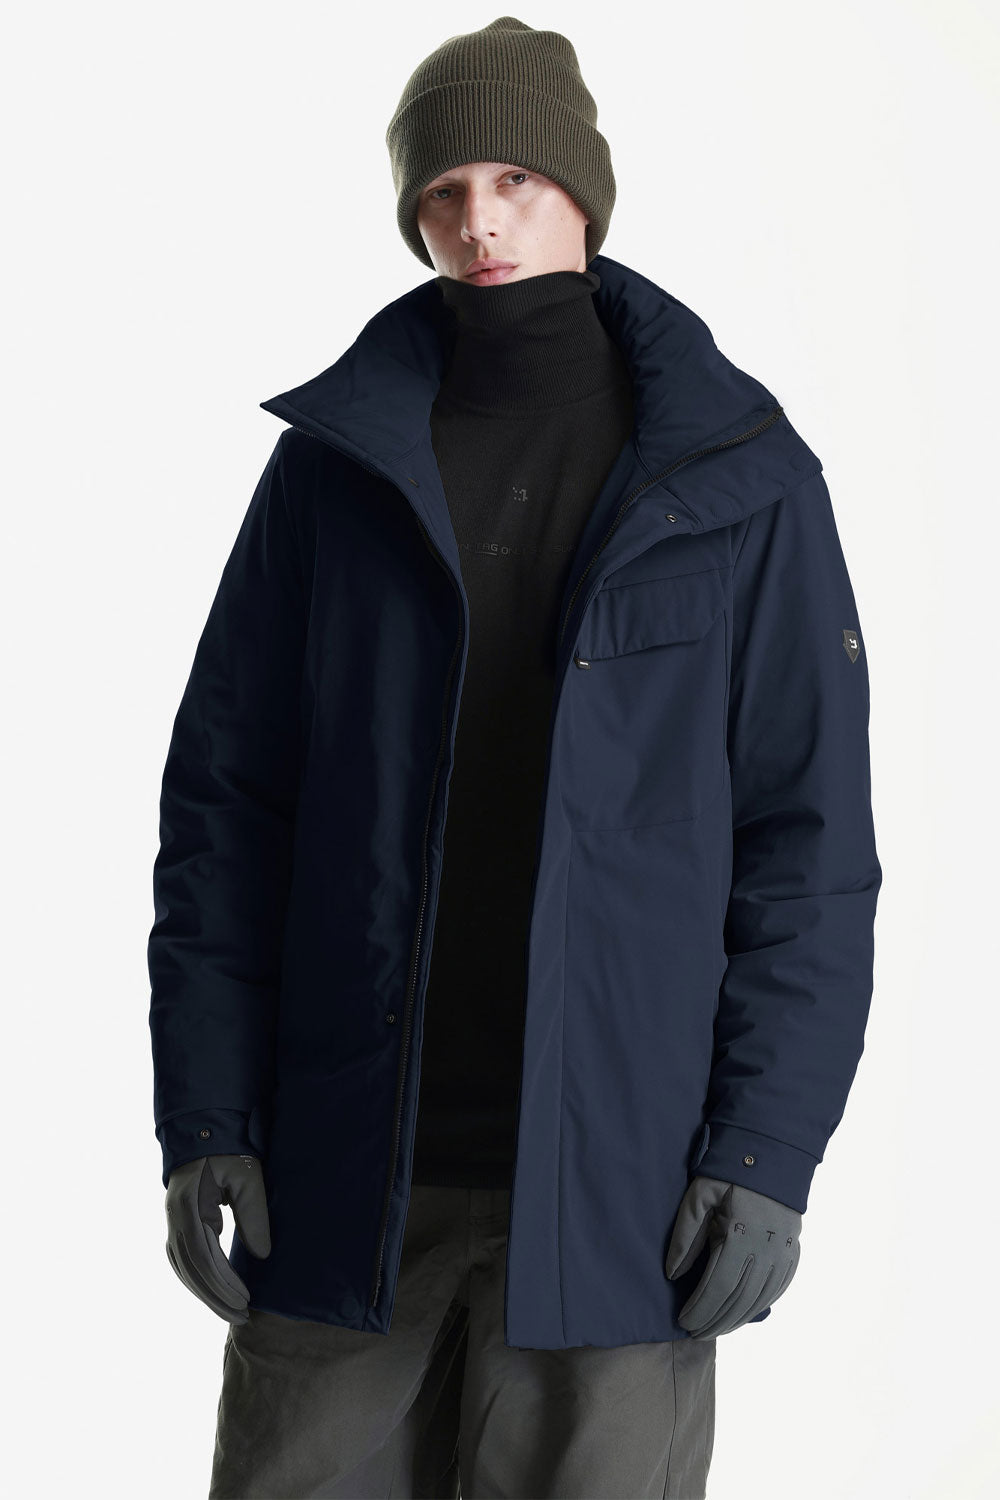 Buy the Krakatau Masaru Removable Hood Padded Jacket in Navy at Intro. Spend £50 for free UK delivery. Official stockists. We ship worldwide.